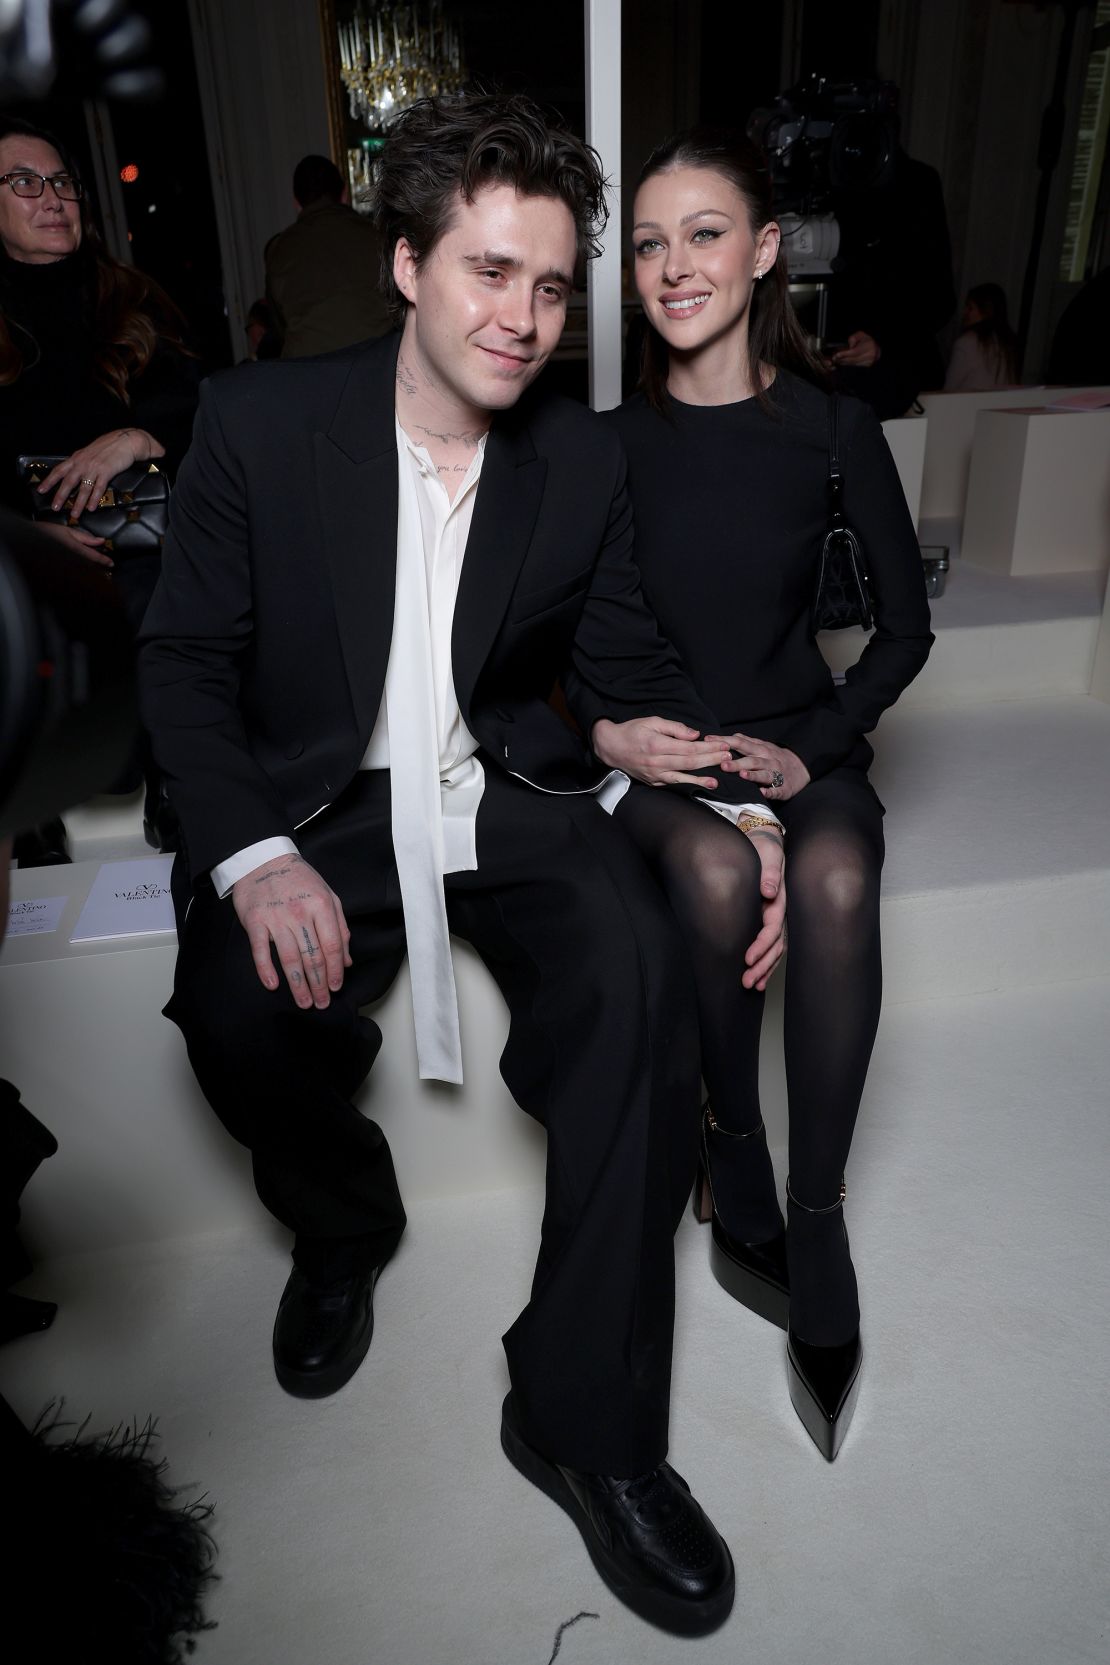 Brooklyn Beckham and Nicola Peltz seated at the Valentino show on March 5, 2023.